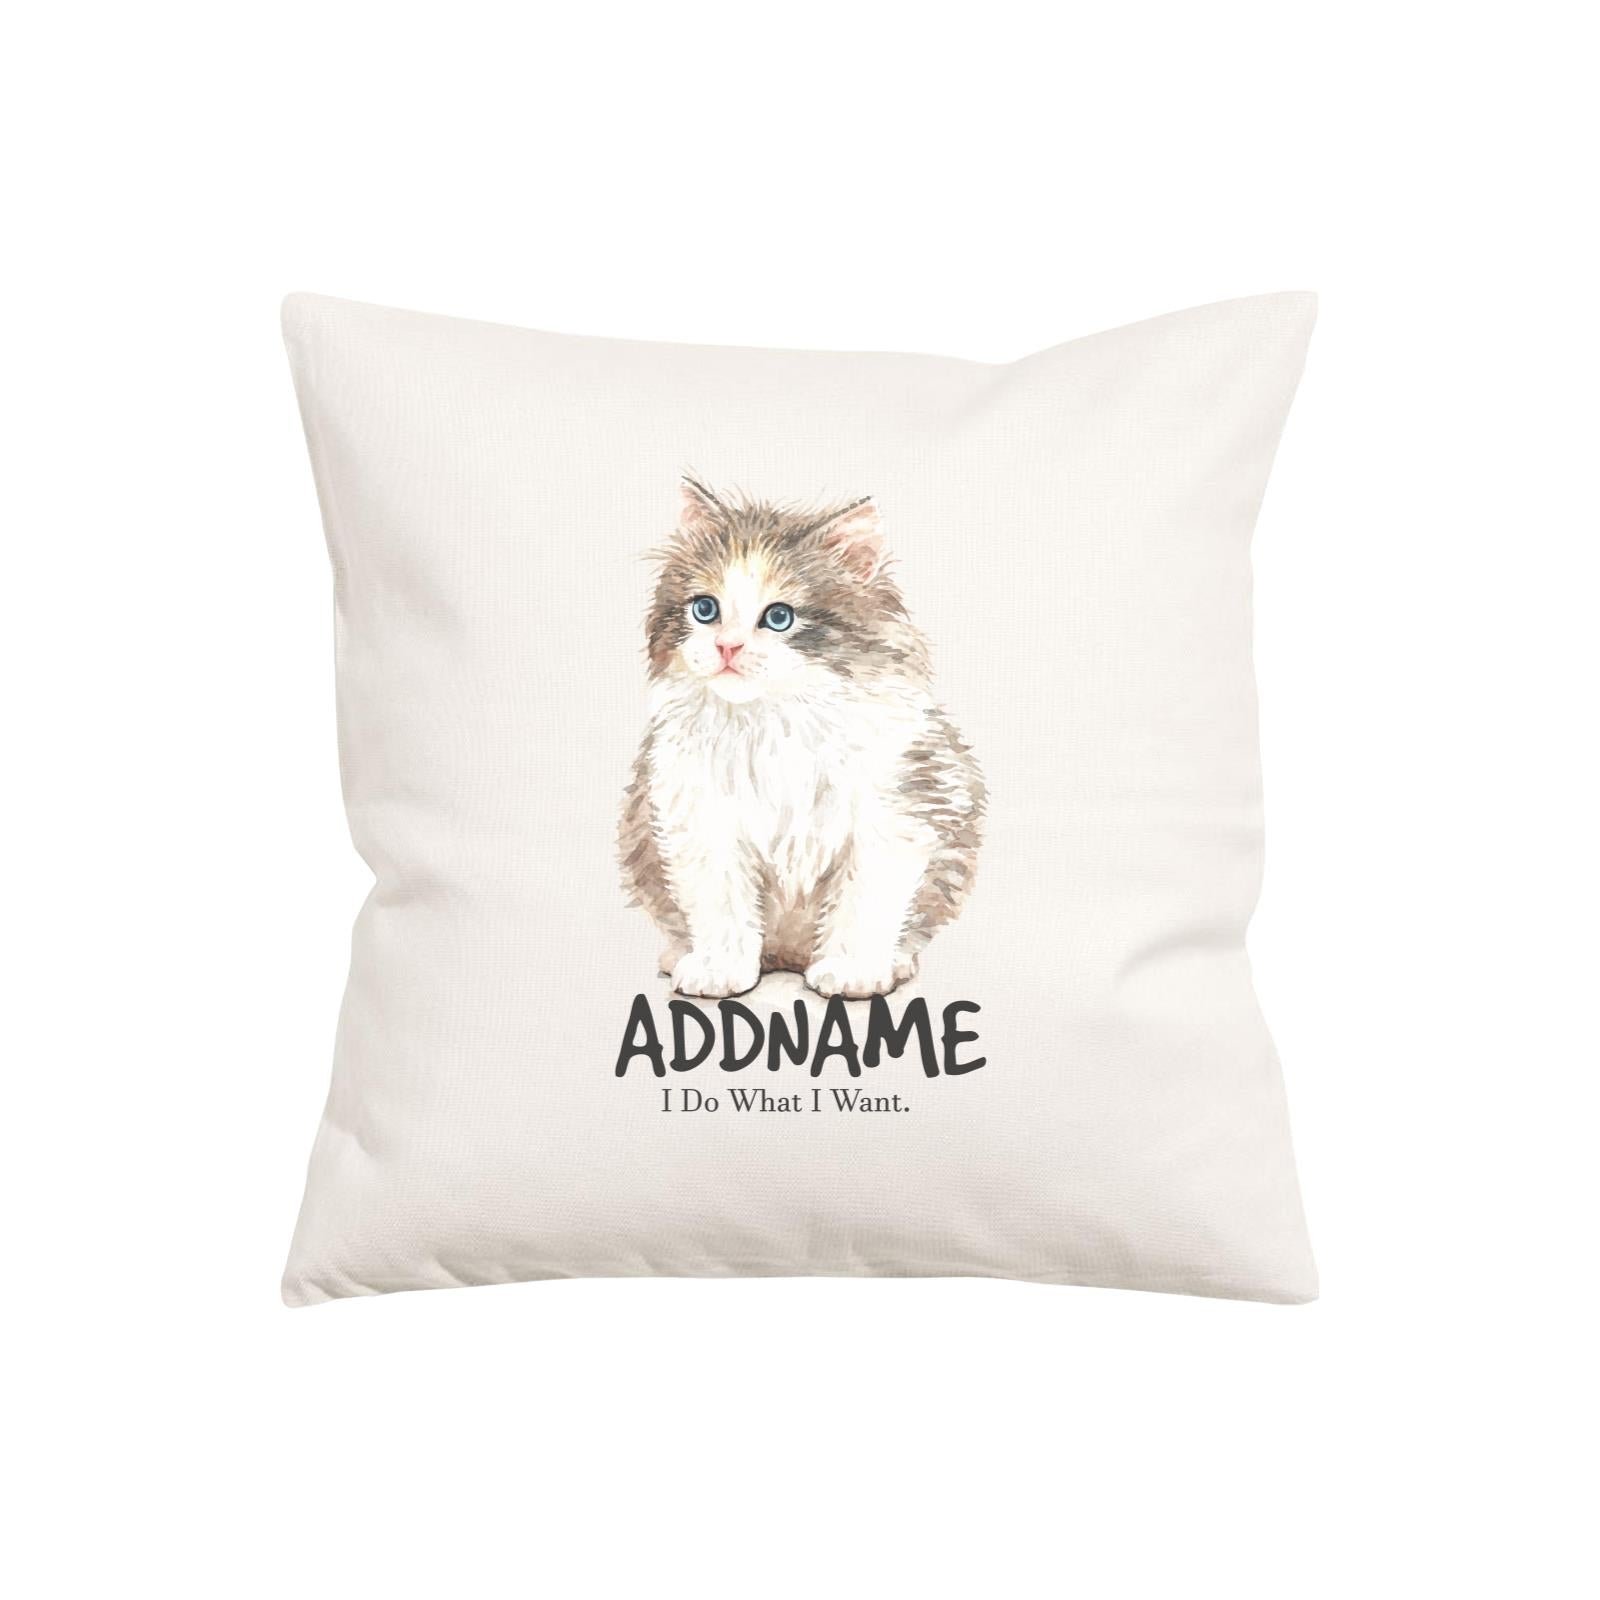 Watercolor Cat Series Kitten I Do What I Want Addname Pillow Cushion